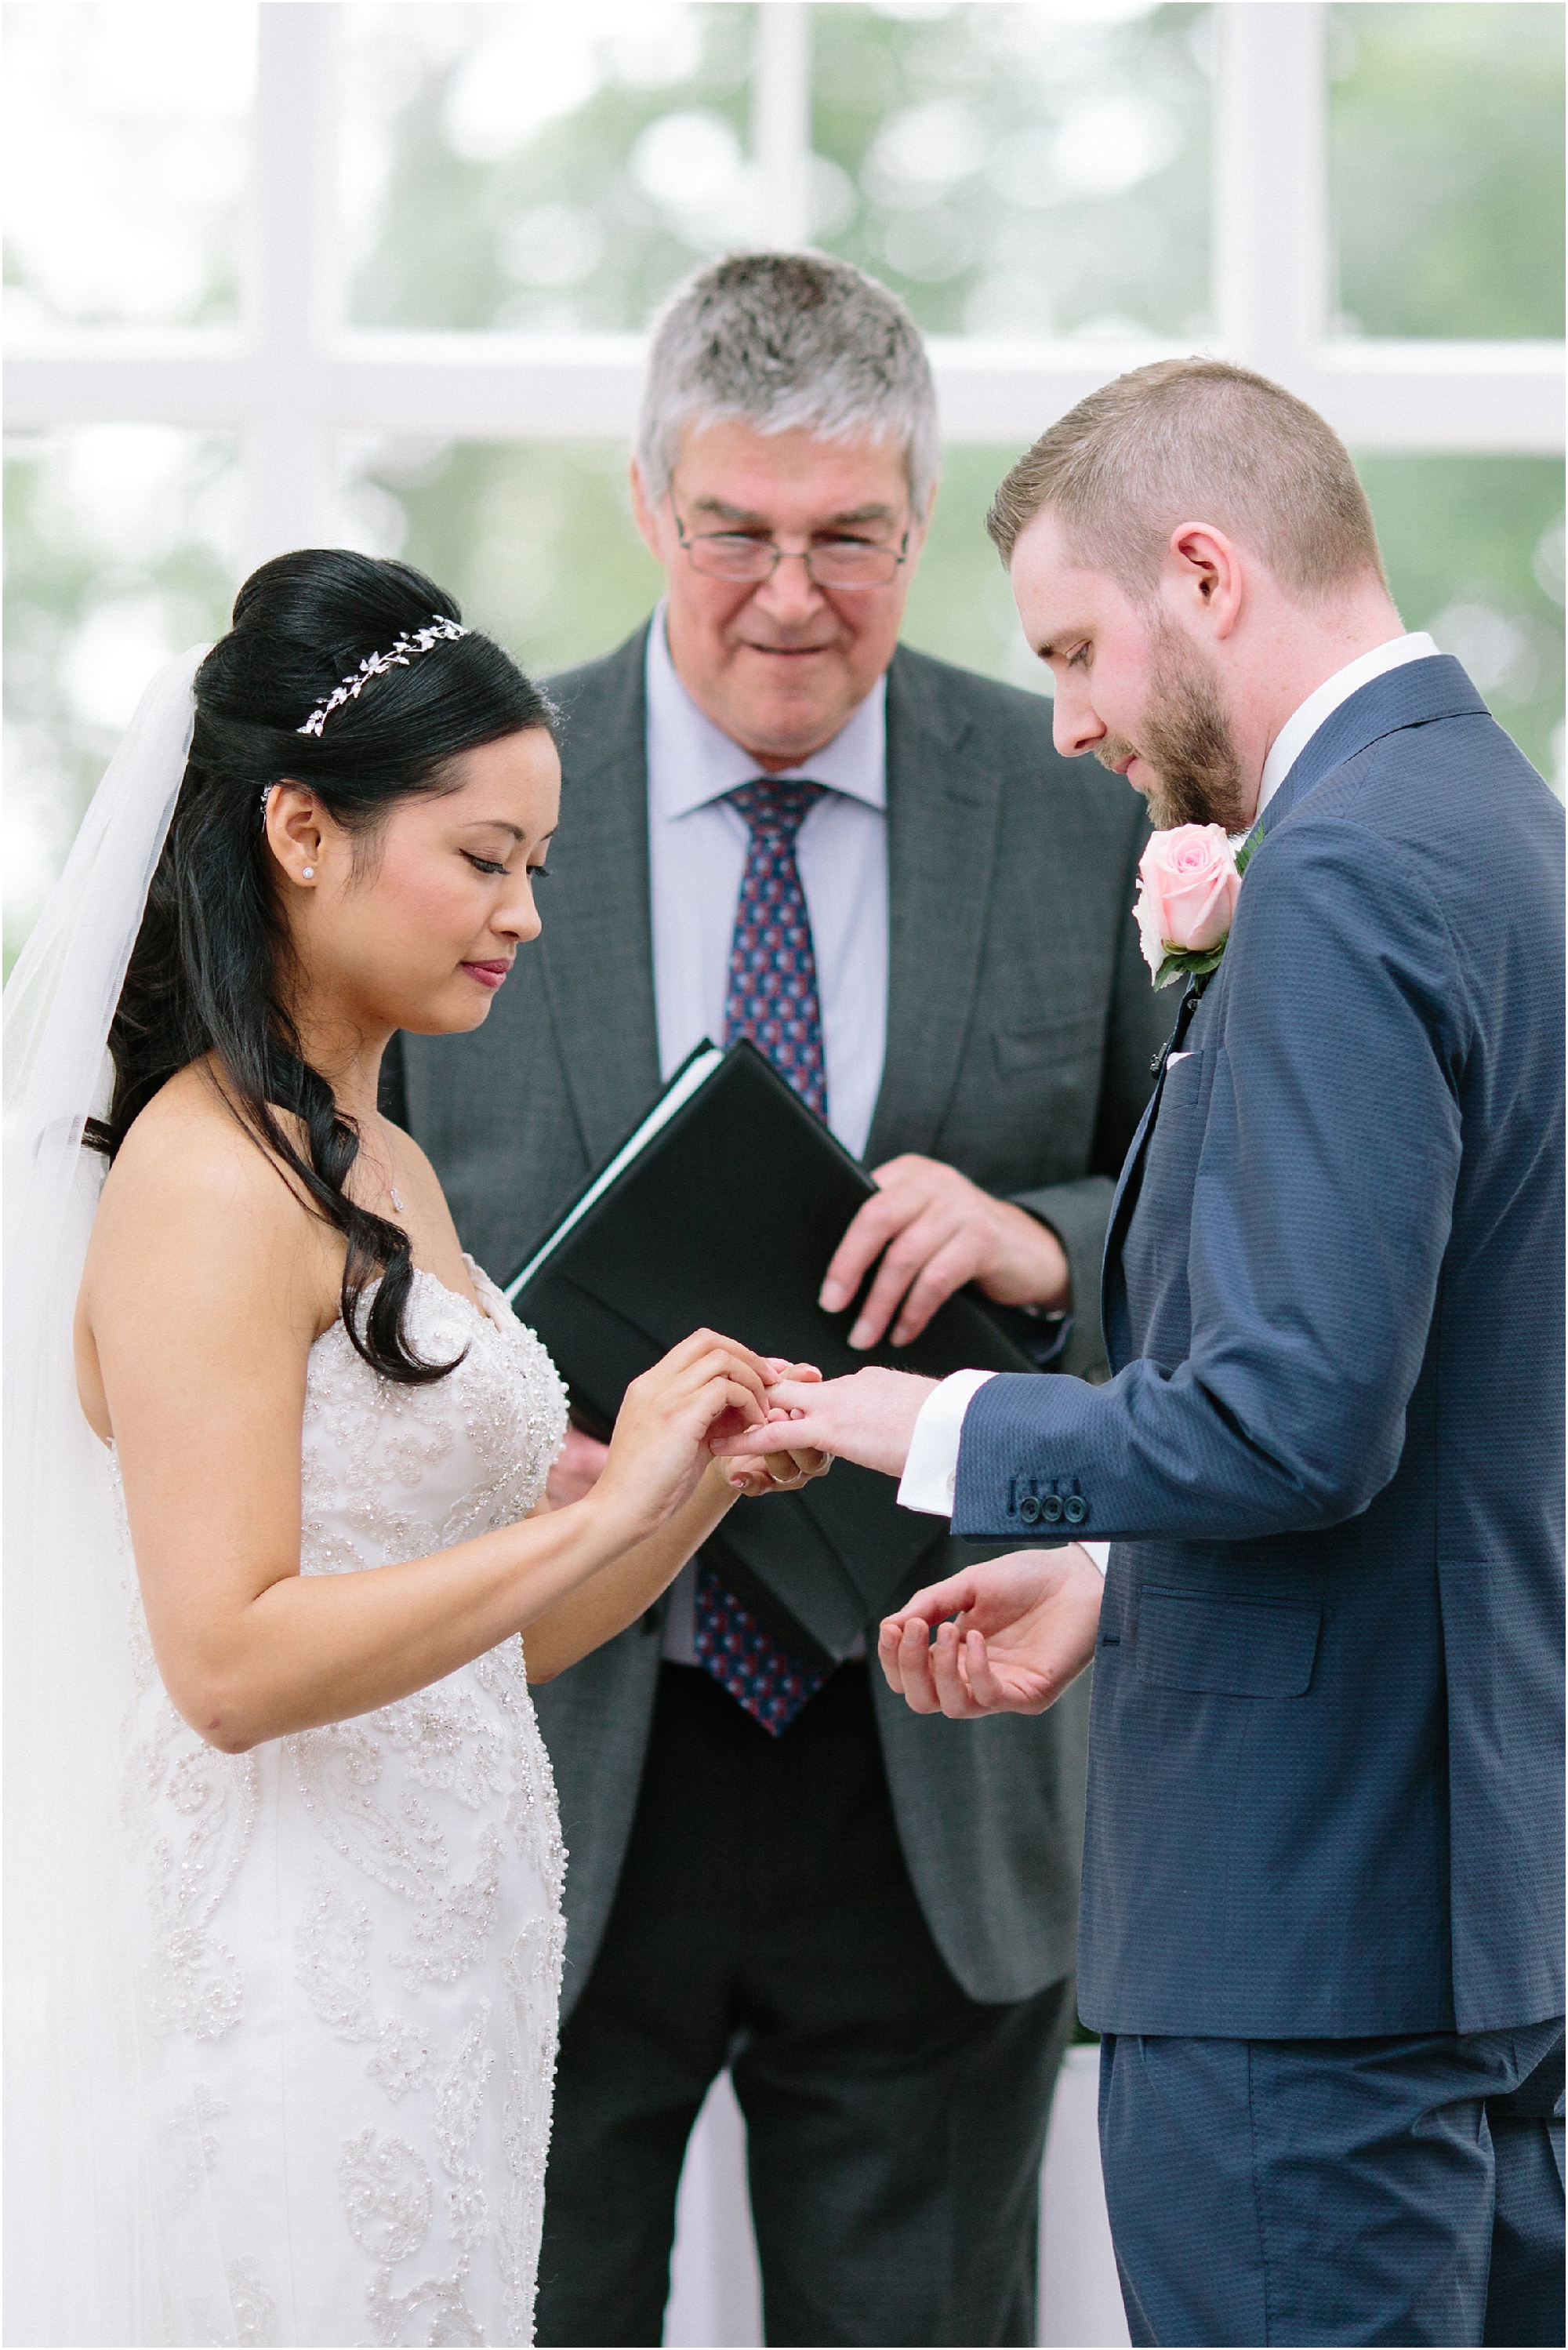 Couple exchanging rings during wedding ceremony